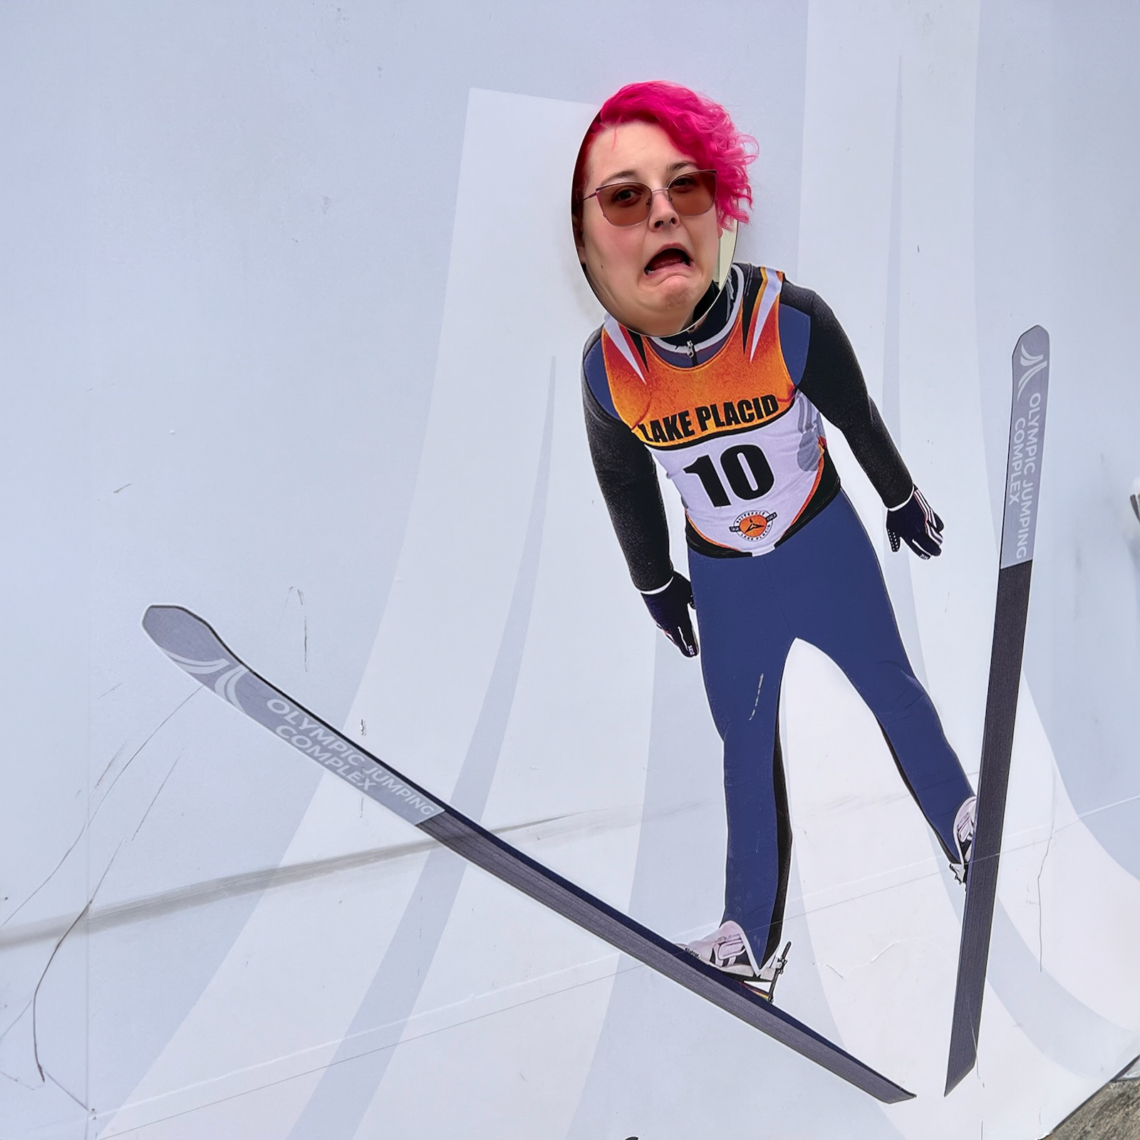 Indigo at a photo site where her face, panicking, is shown on an image of an Olympic ski jump athlete, mid-jump.